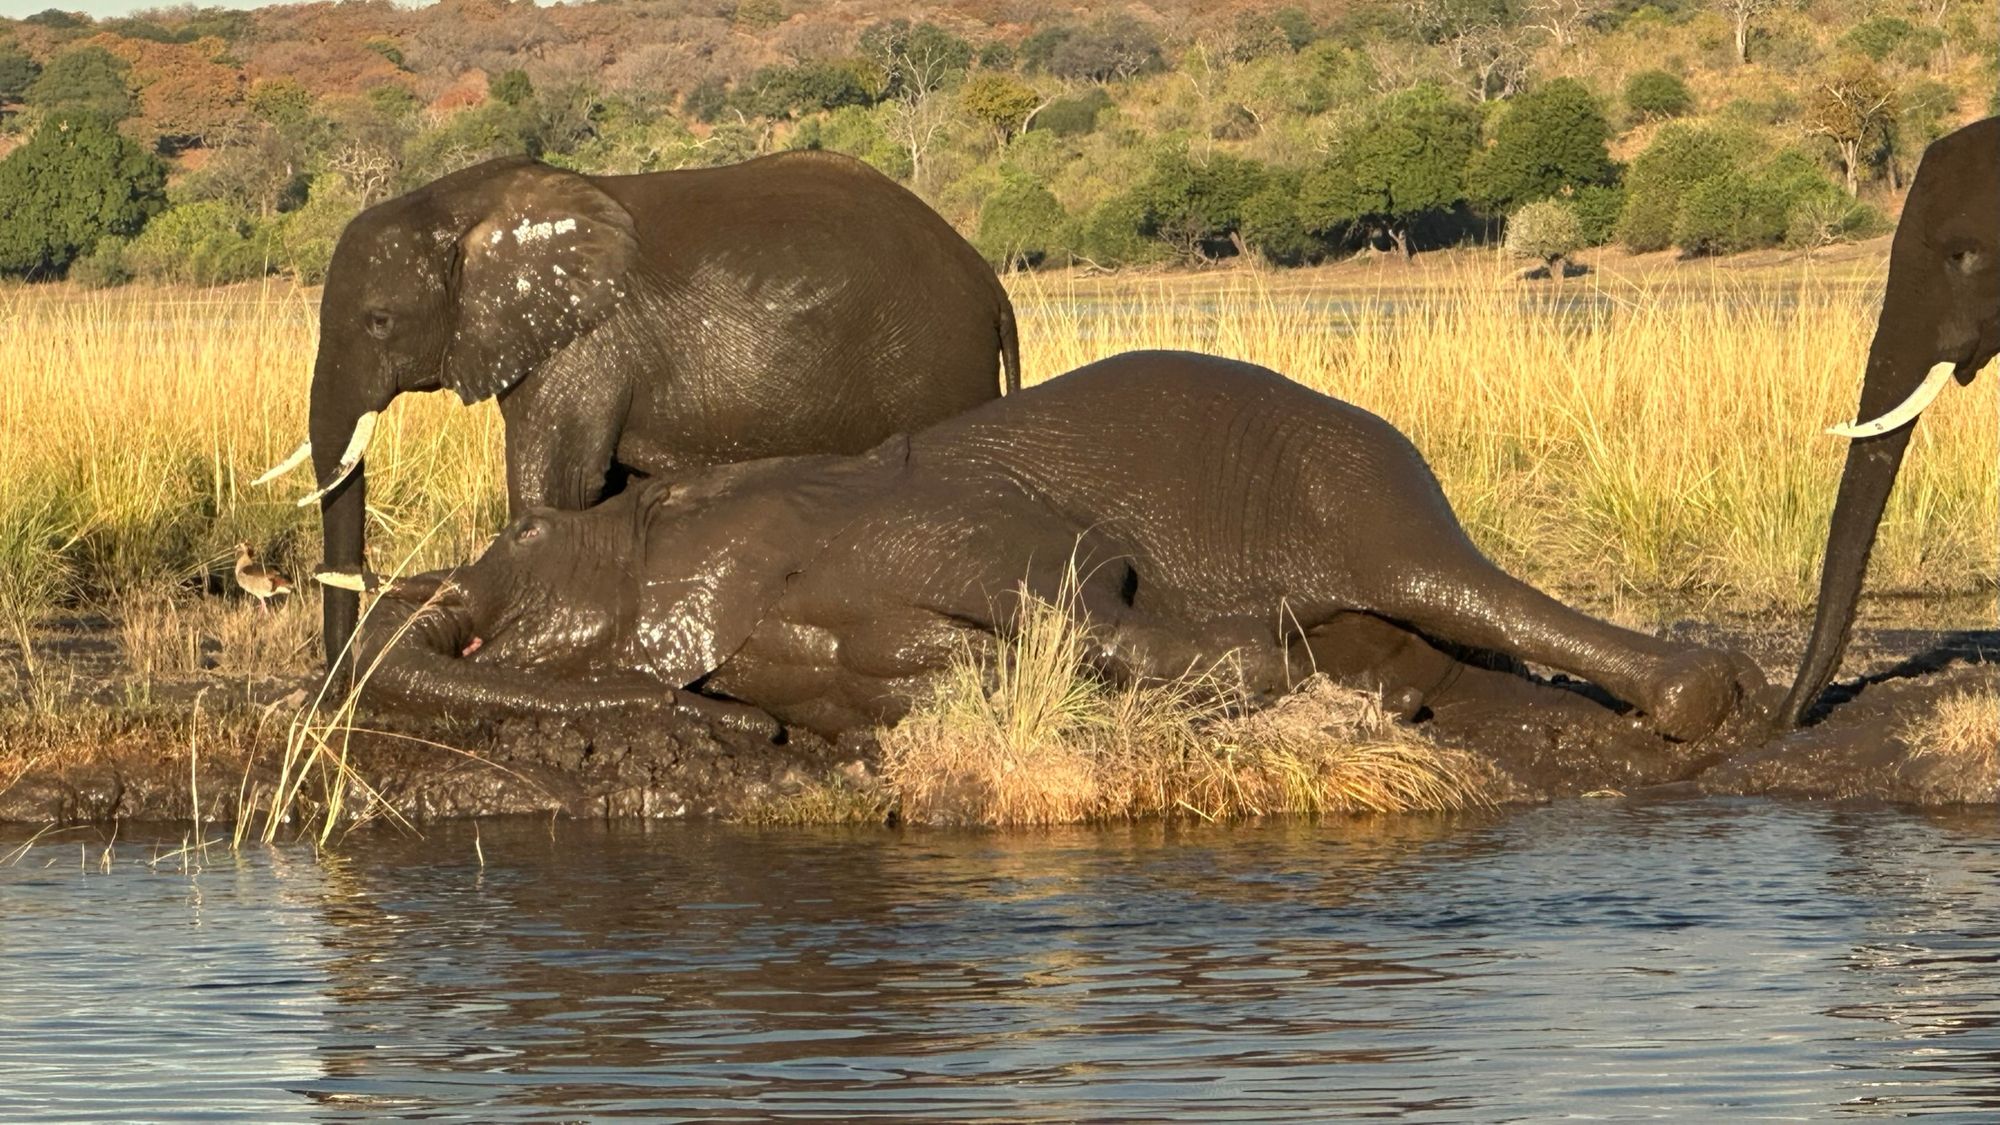 Elephants on the river bank, rolling in mud.